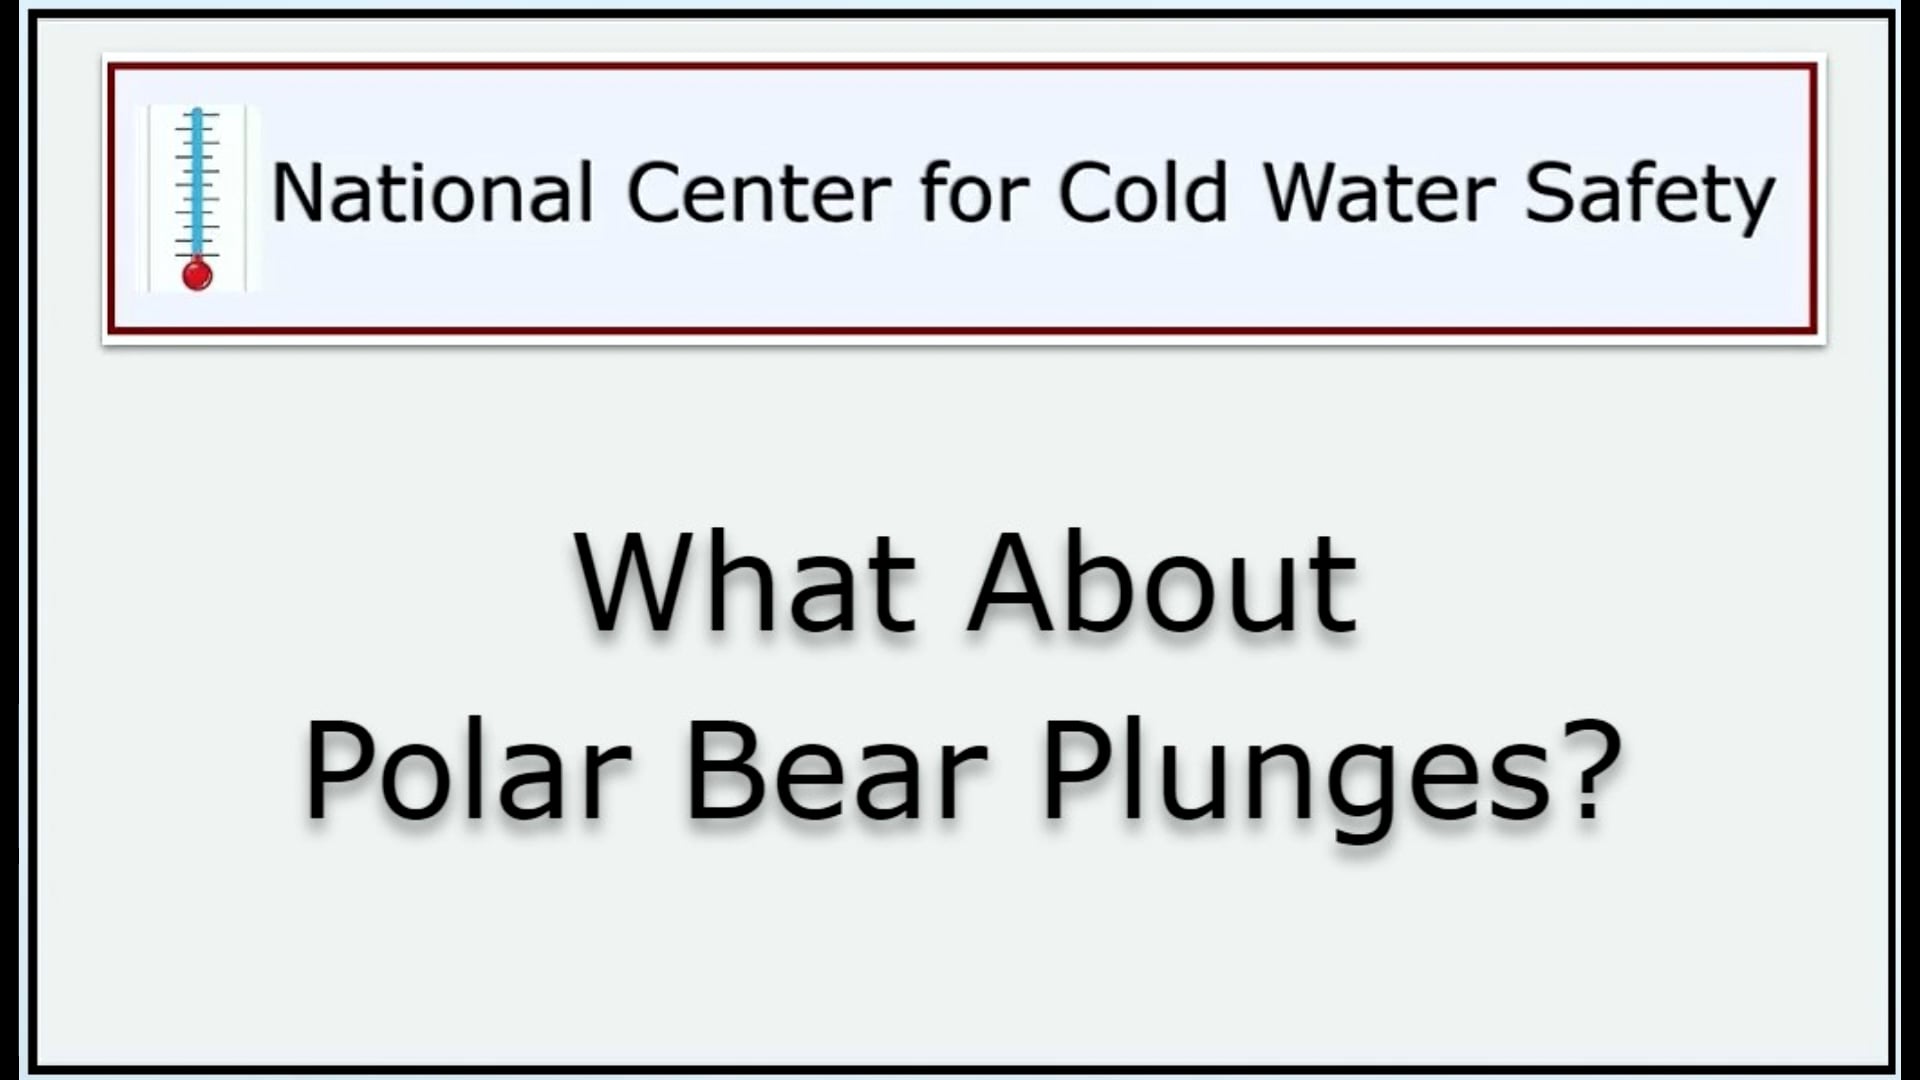 What About Polar Bear Plunges?